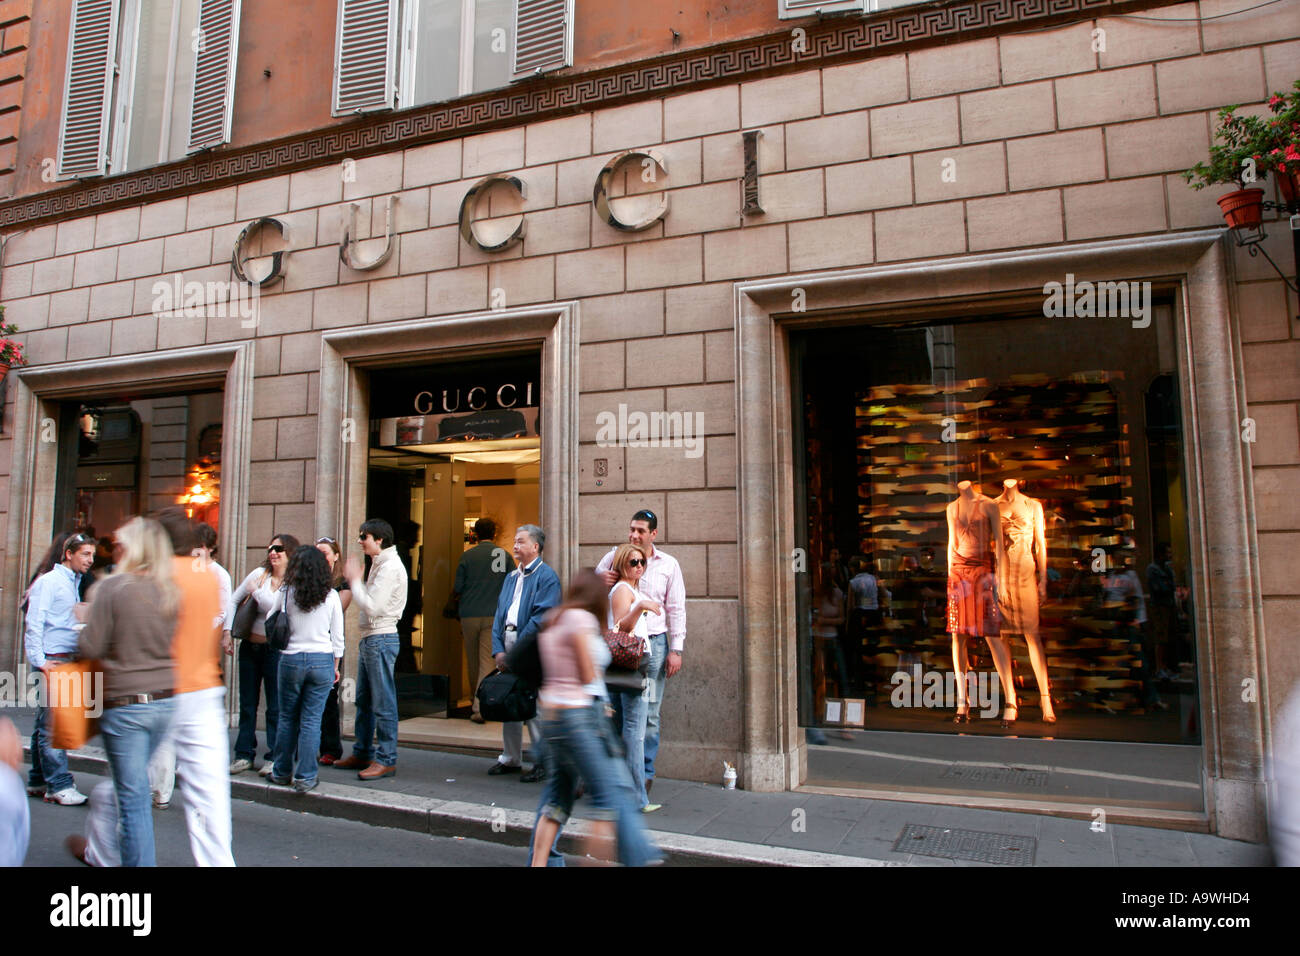 Gucci shop in Rome Italy Stock Photo - Alamy